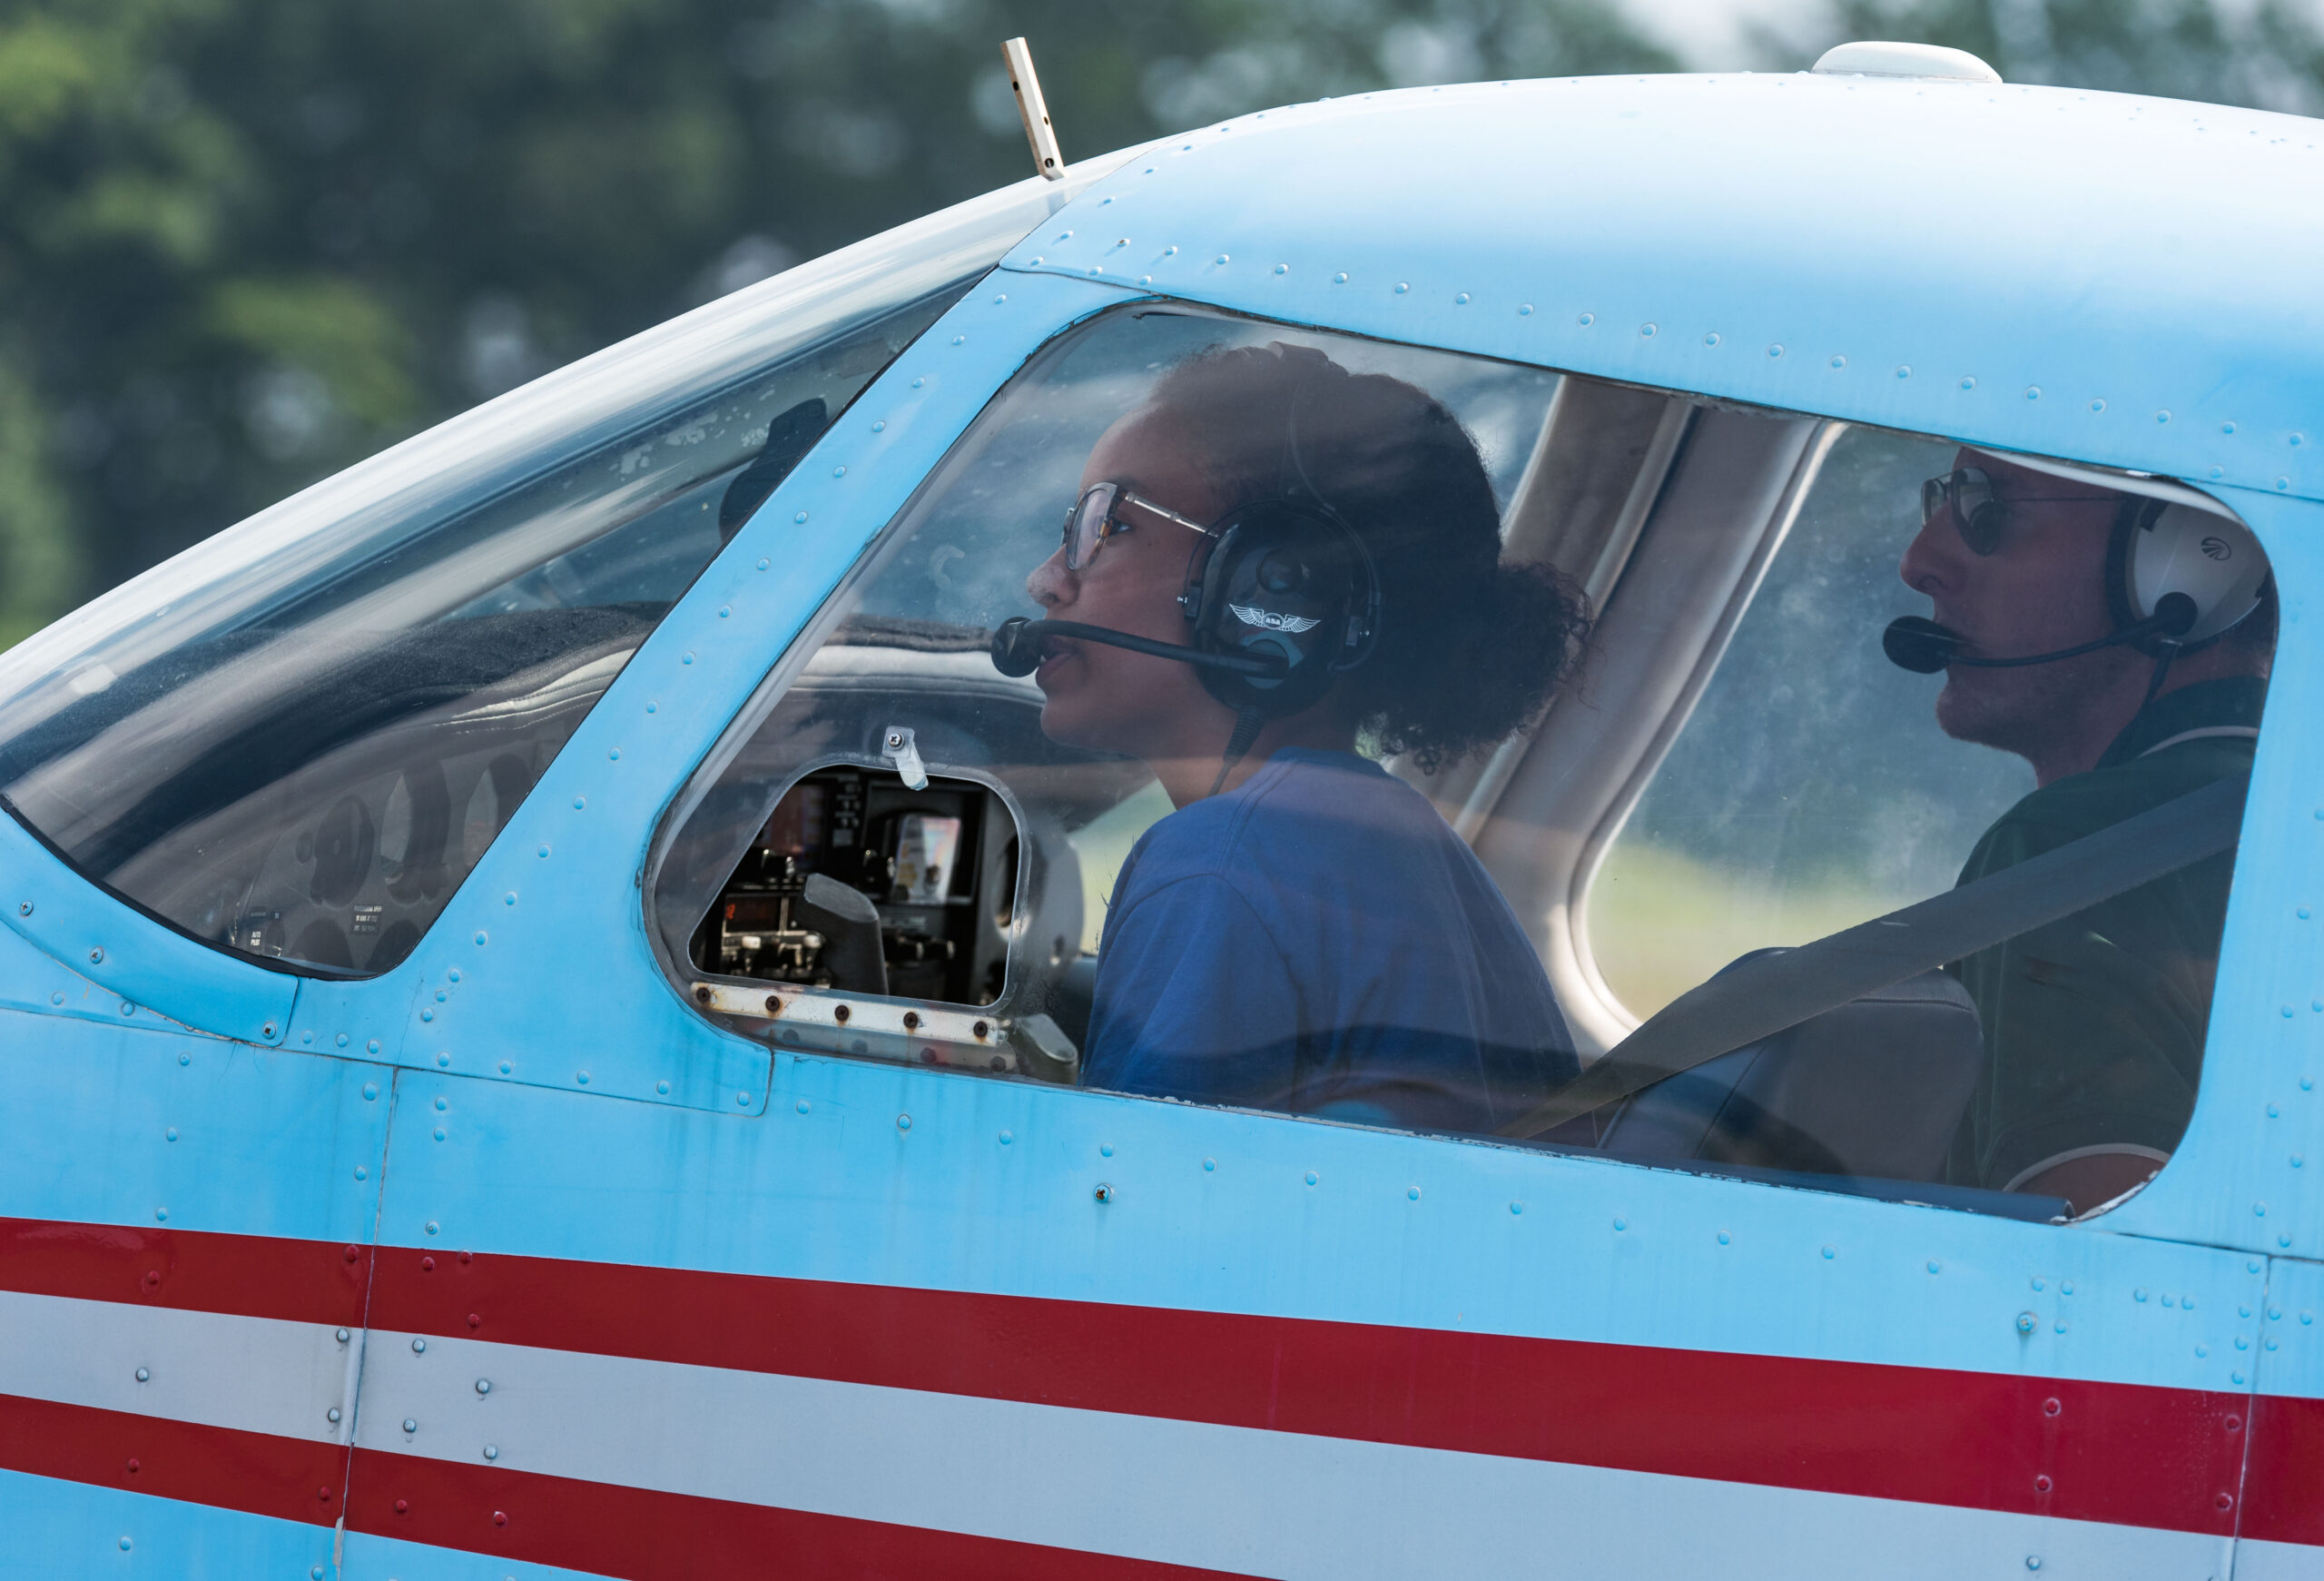 Air Force Junior Reserve Officers’ Training Corps cadet Maya Ross, prepares to taxi a Piper Warrior aircraft onto the runway Aug. 6, 2019, at Delaware Airpark in Cheswold, Del. Ross and her Delaware State University certified flight instructor flew around the airpark and practiced skills she learned during the eight-week AFJROTC Summer Flight Academy held at DSU in Dover. Ross is a cadet with AFJROTC Detachment BE-931, SHAPE American High School, Mons, Belgium. (U.S. Air Force photo by Roland Balik)